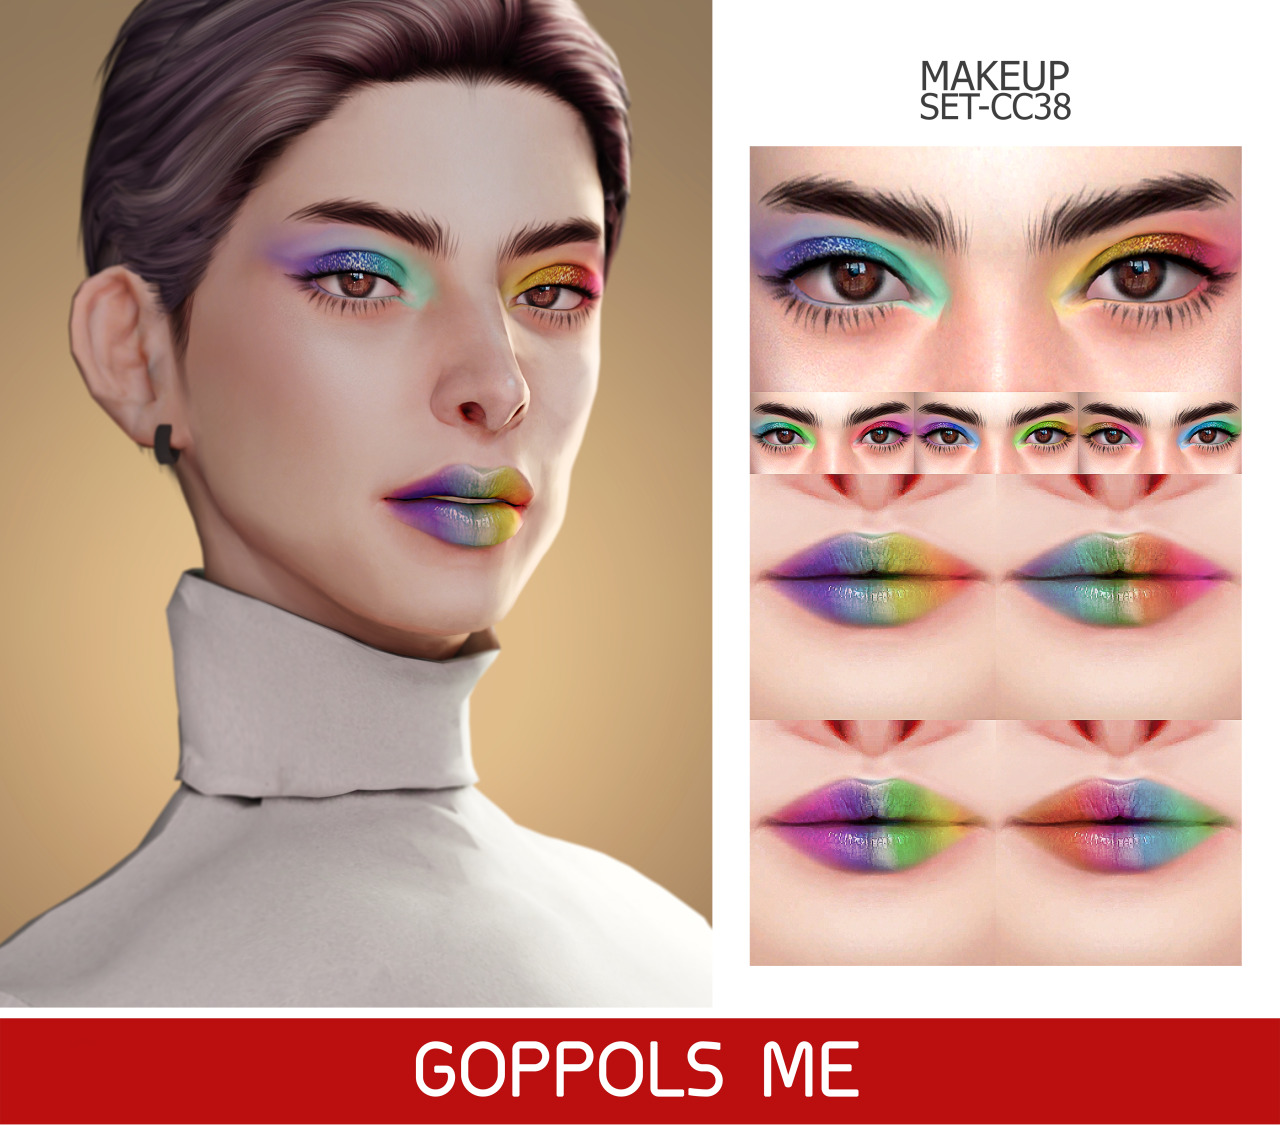 GPME-GOLD MAKEUP SET CC38DownloadHQ mod compatibleAccess to Exclusive GOPPOLSME Patreon onlyThank for support me  ❤  Thanks for all CC creators ❤Hope you like it .Please don’t re-upload #goppolsme#thesims4#sims4cc#sims4ccfinds#sims4makeup#s4cc#s4ccfinds#s4makeup